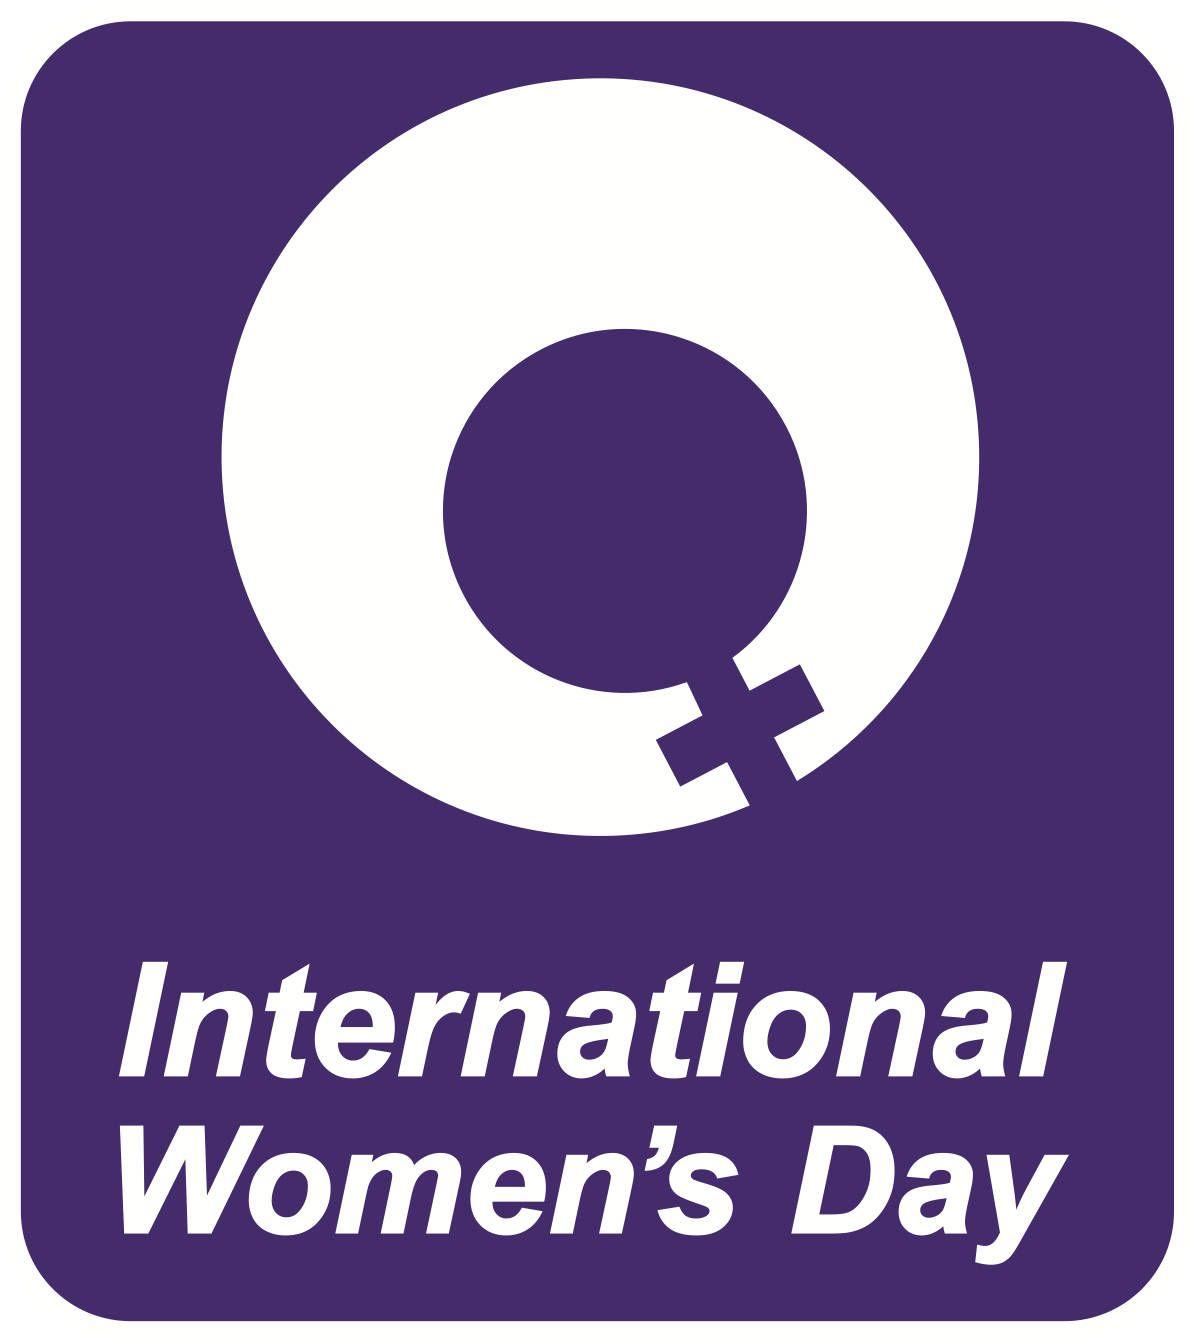 Every day is International Women&;s Day for DFW. Dining for Women